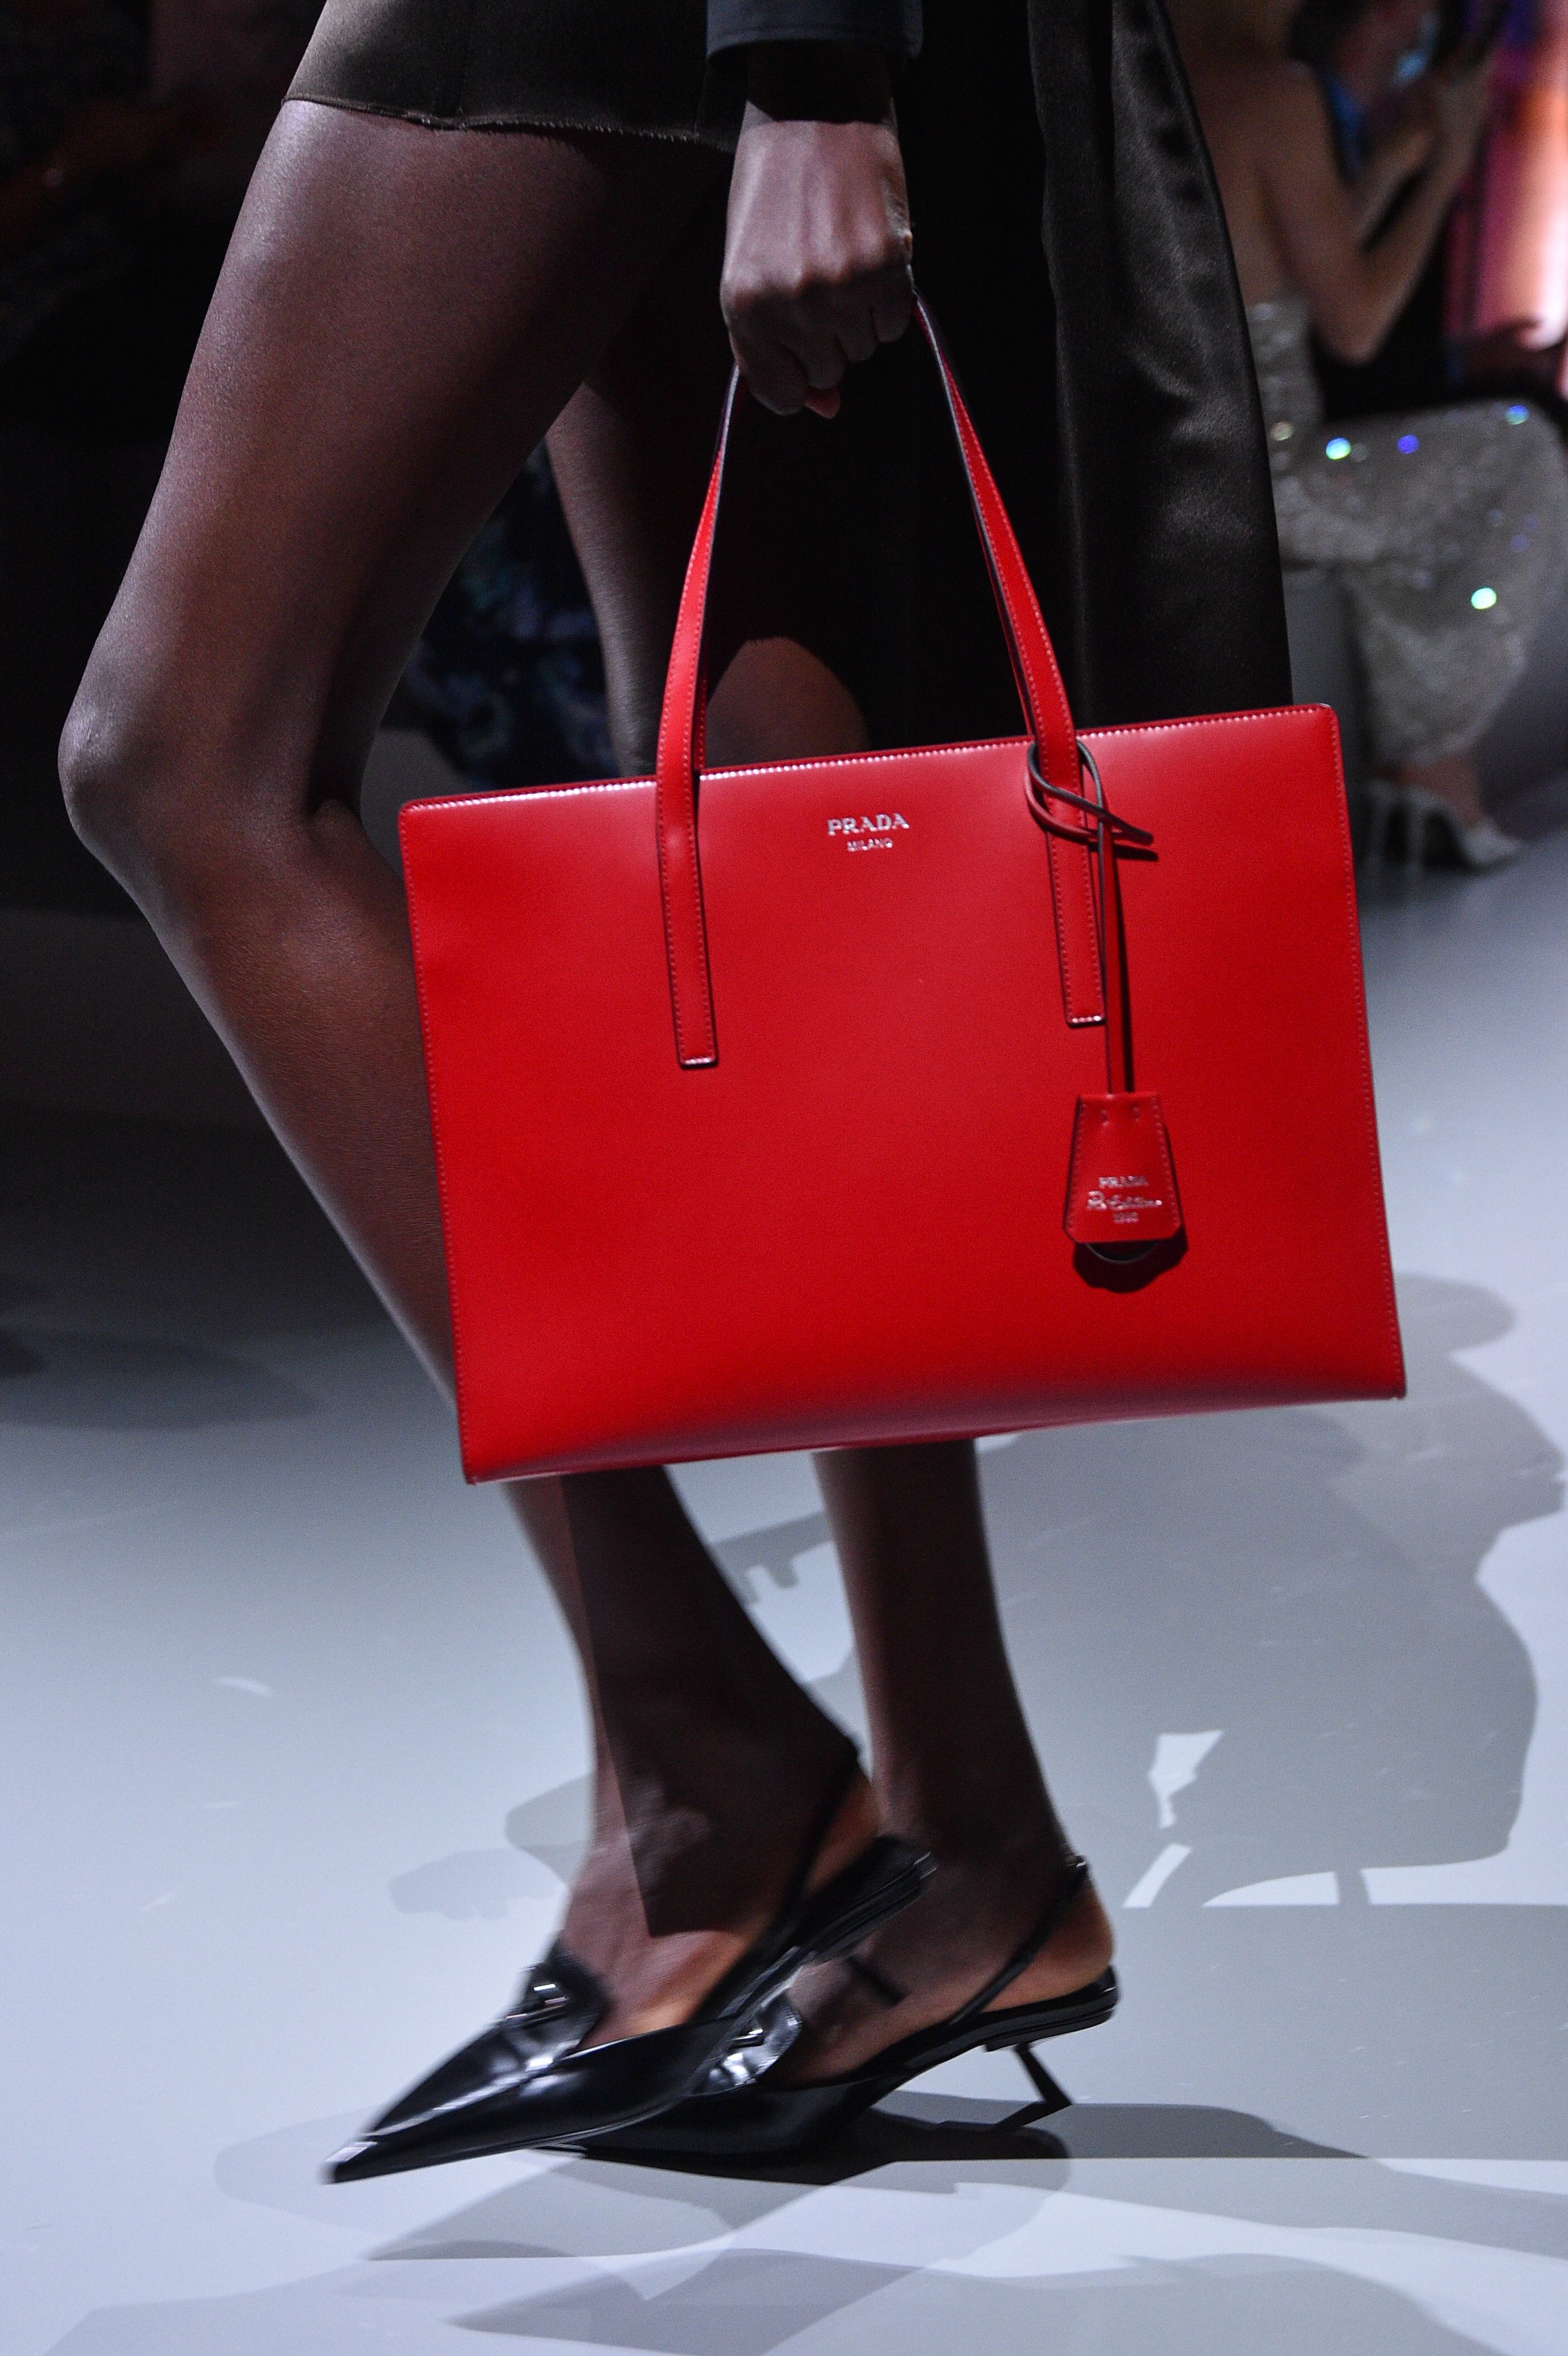 5 Summer Bag Trends for 2022 Thatll Be Everywhere Soon